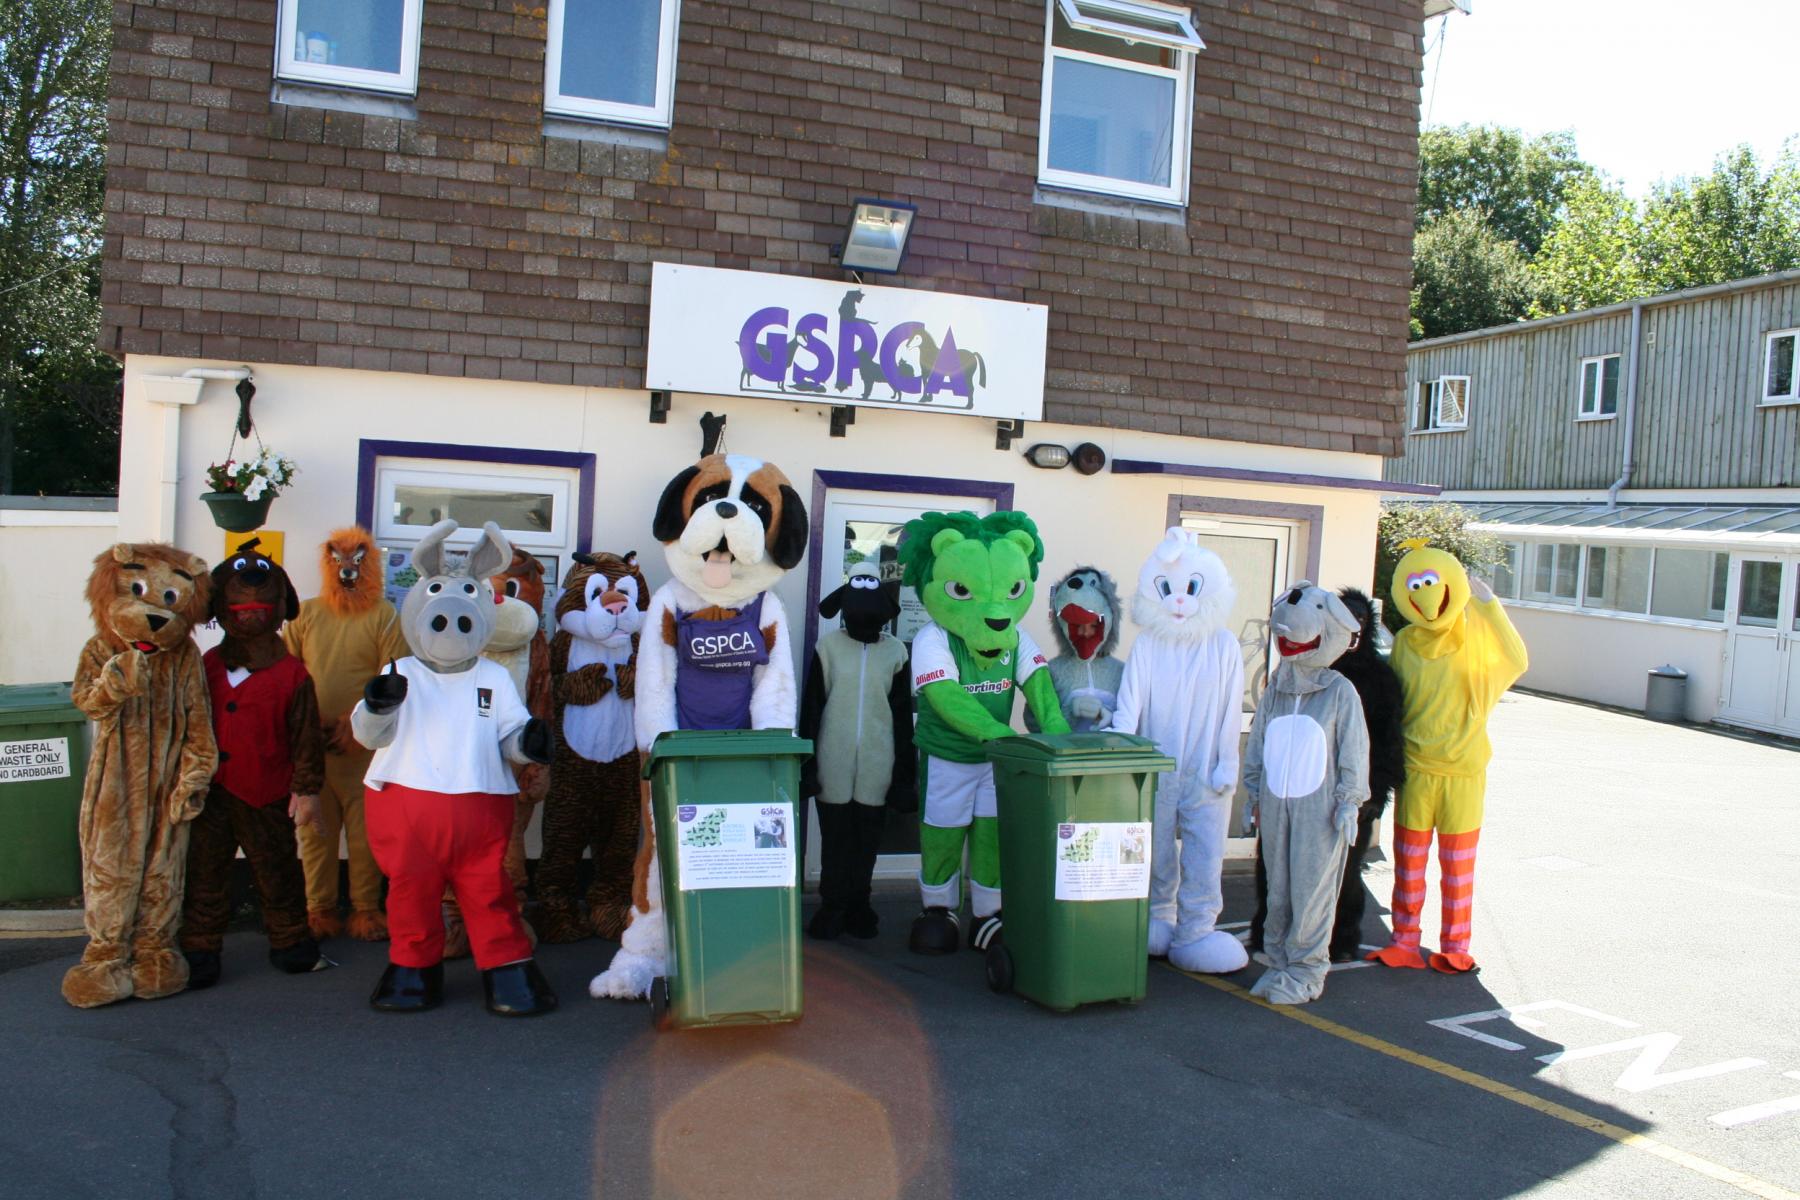 Mascot Racing in Guernsey with Roary the GFC Lion, Daniel the Donkey from Island FM, Bernard the GSPCA Mascot and animal friends